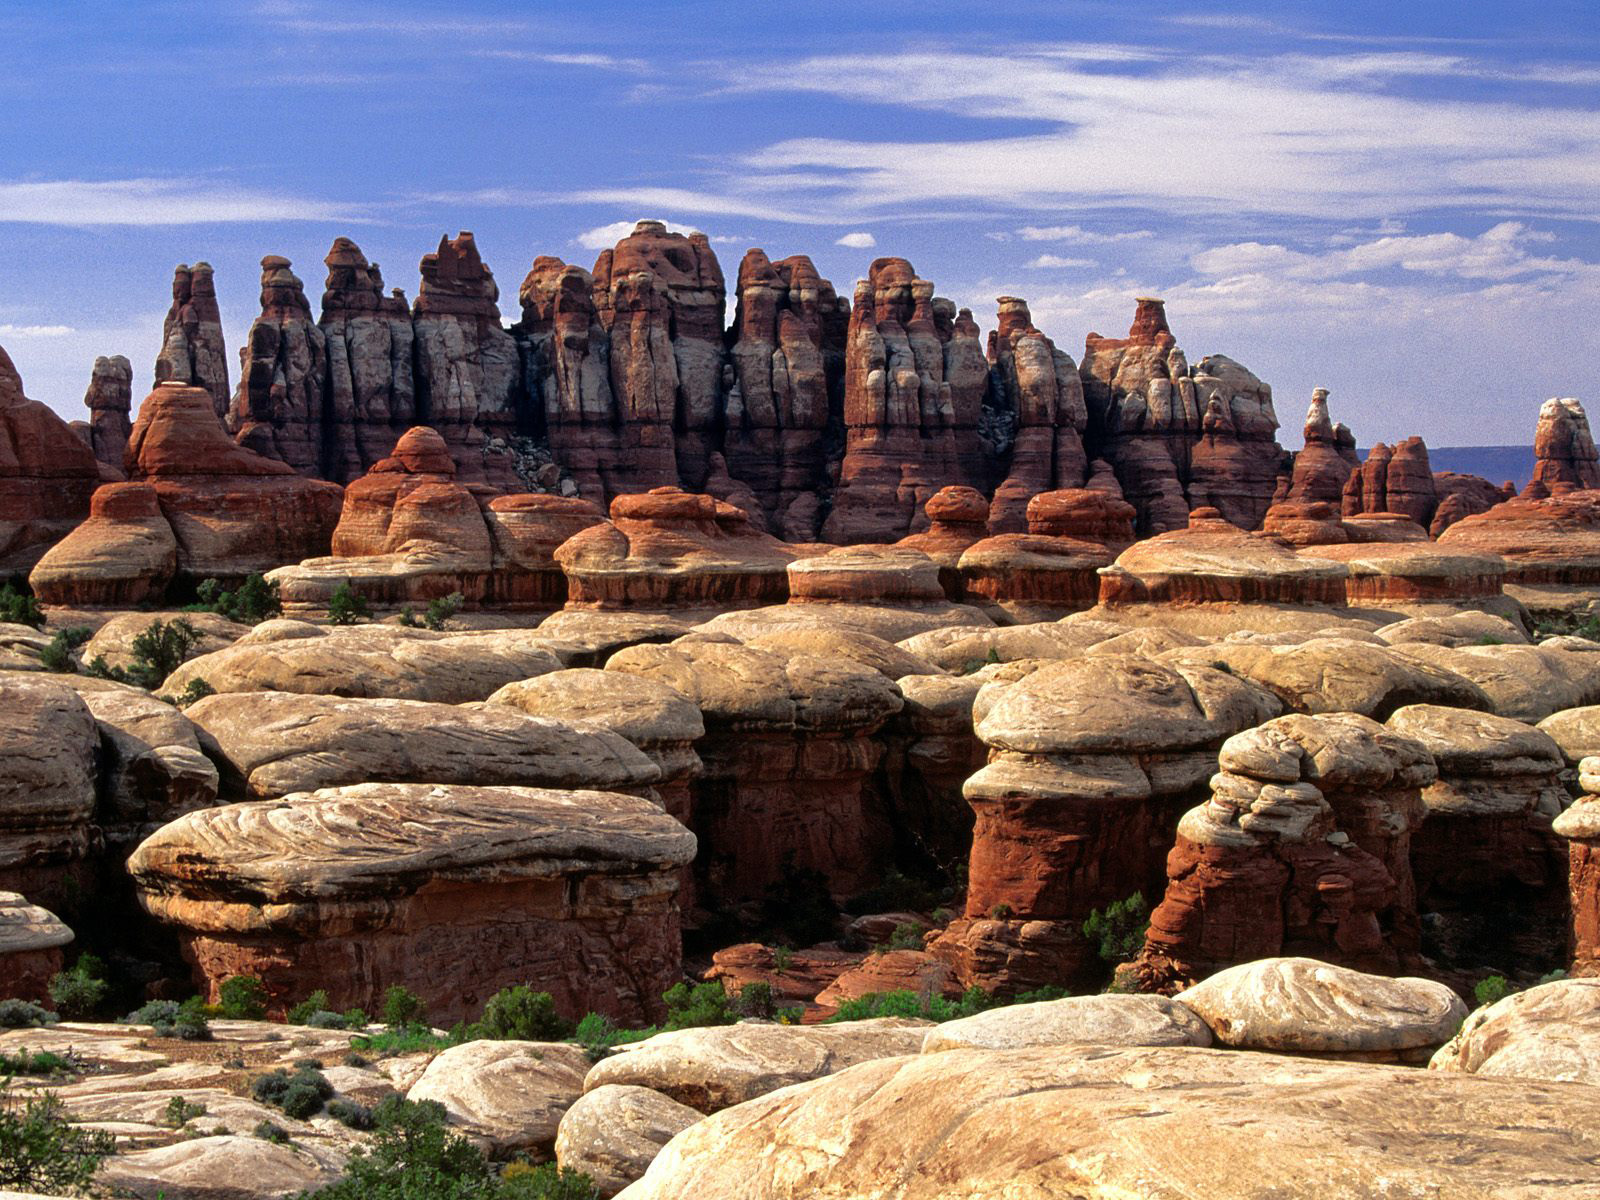 Canyonlands National Park is designated as a National Park